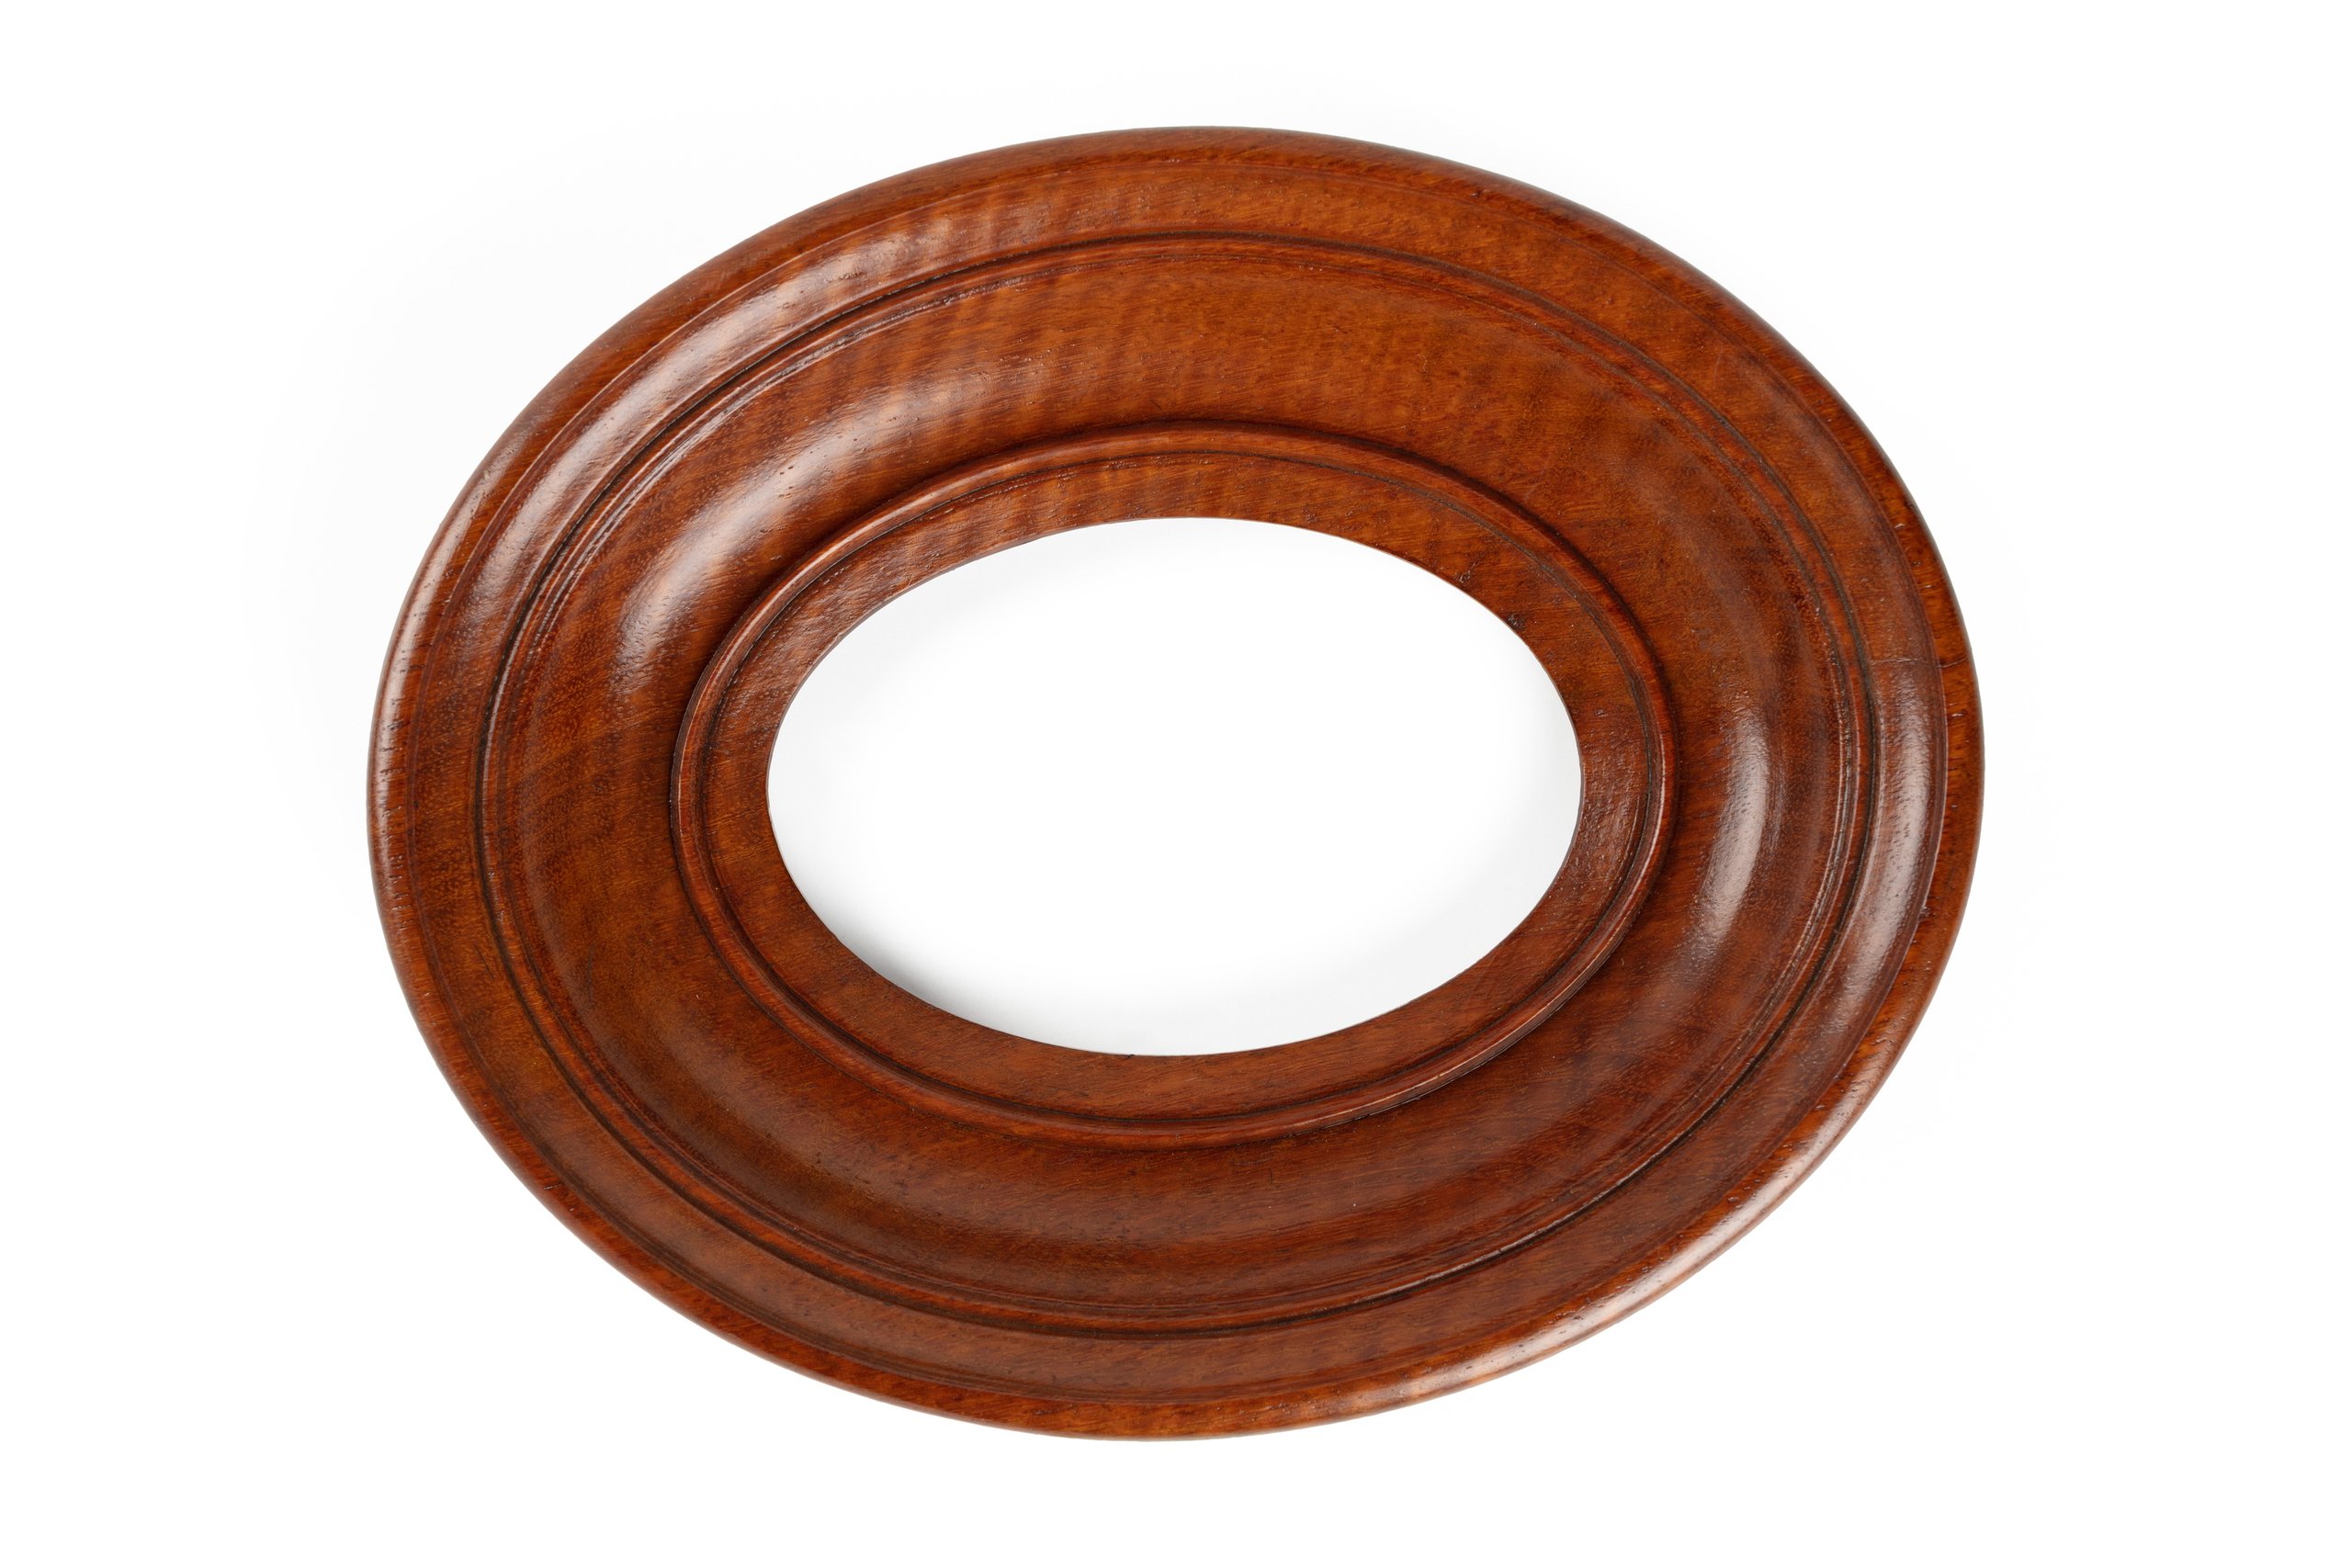 Timber sample, oval picture frame made of Western Australian Red Gum